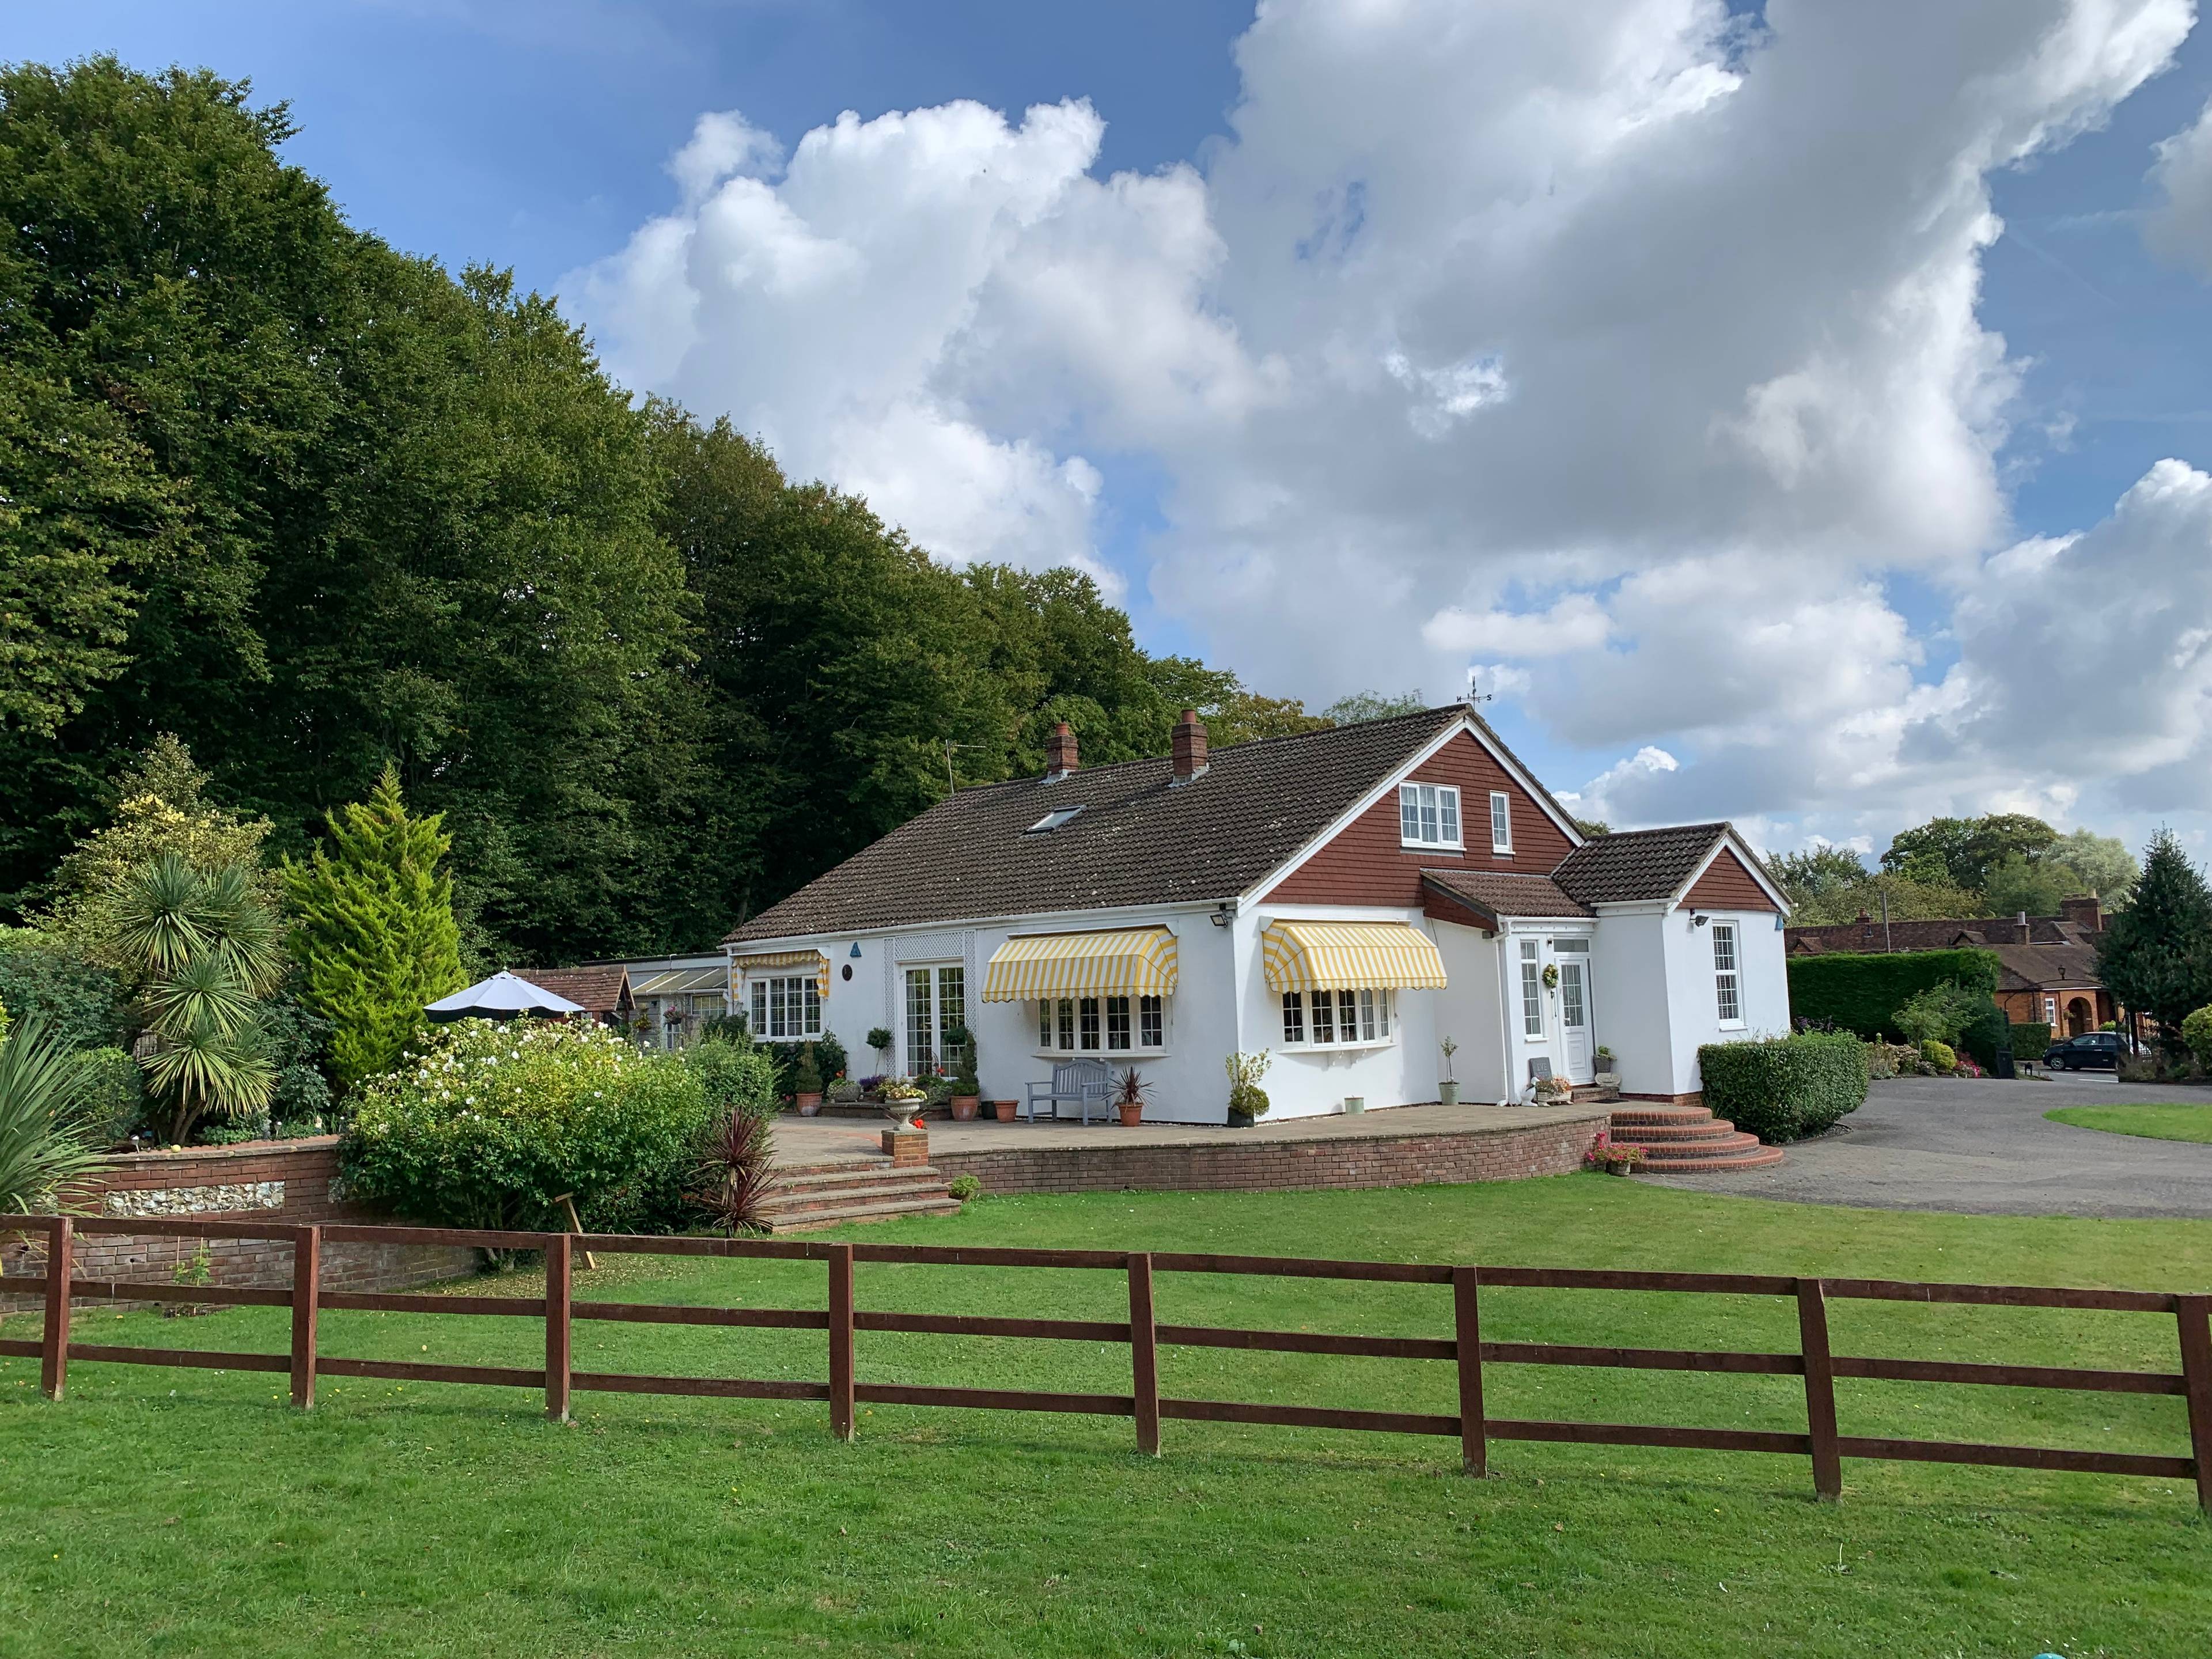 Spacious 6 bedroom family home with swimming pool, paddock and stables set in the idyllic village of Penn, Buckinghamshire. A beautiful home rich with royal connections.